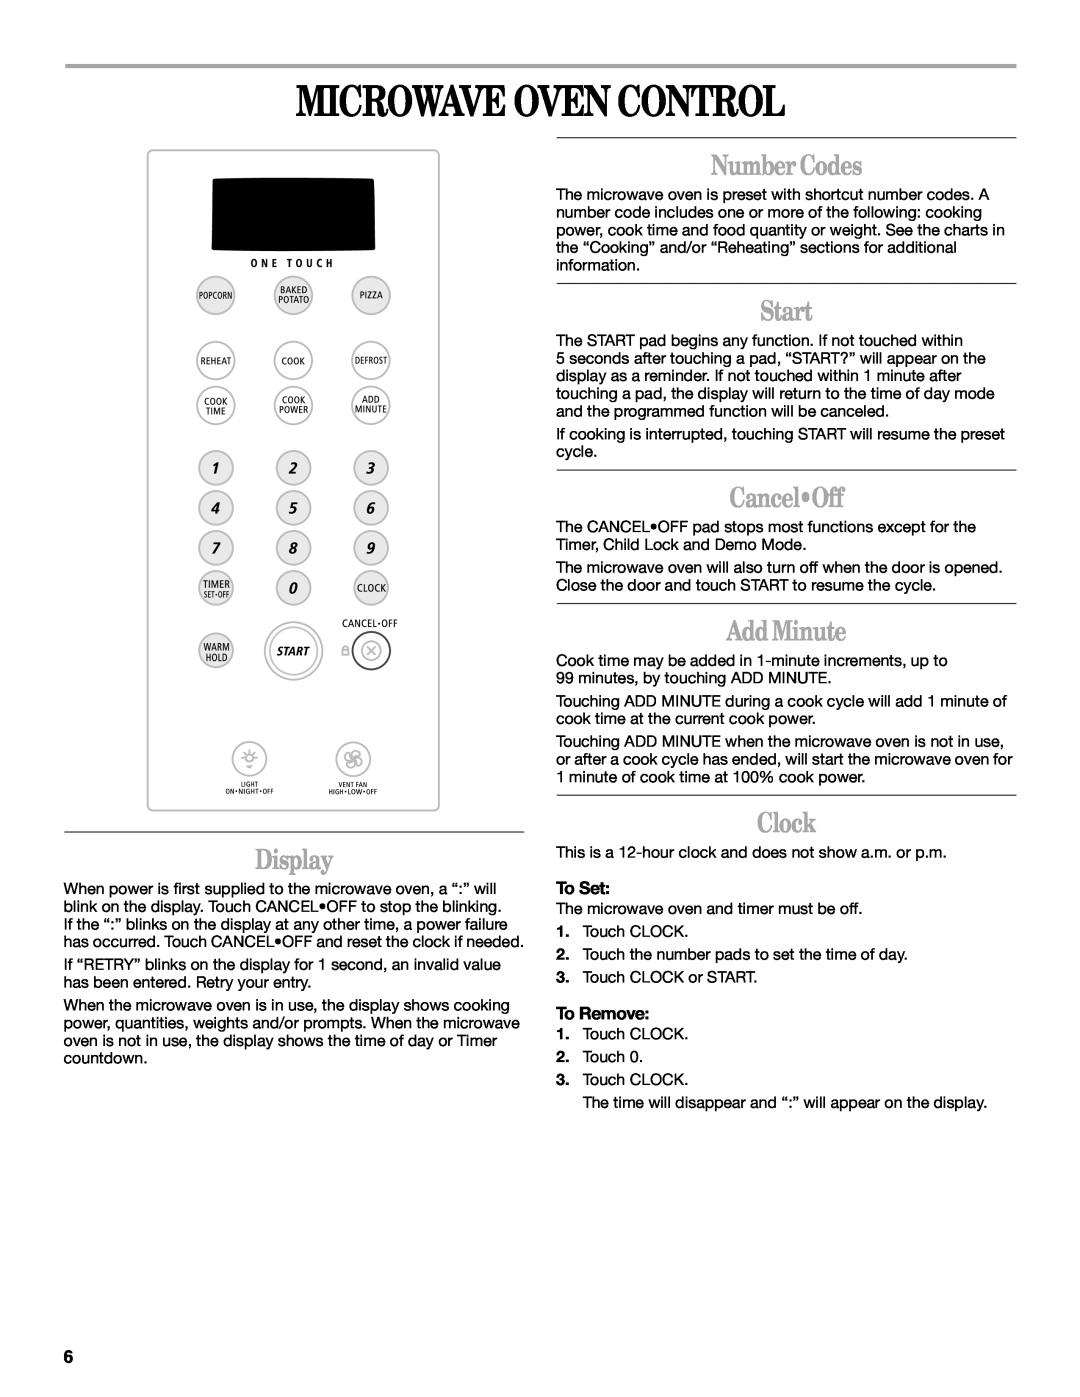 Whirlpool YMH1141XM Microwave Oven Control, Display, Number Codes, Start, CancelOff, Add Minute, Clock, To Set, To Remove 